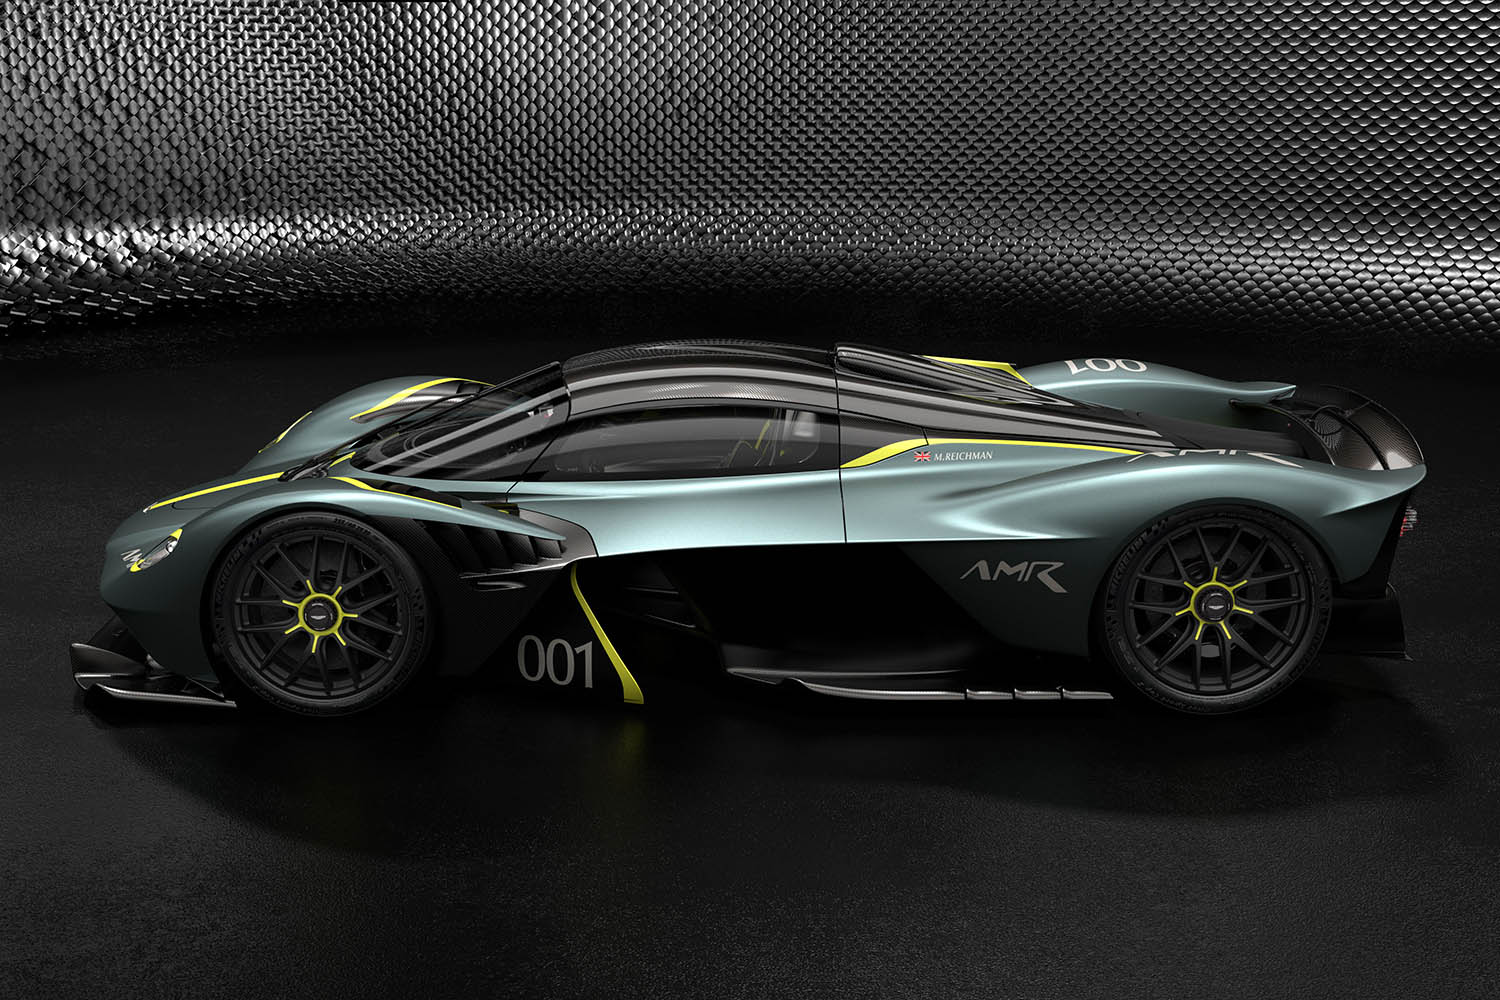 Aston Martin Valkyrie with AMR Track Performance Pack - Stirling Green and Lime livery (3).jpg